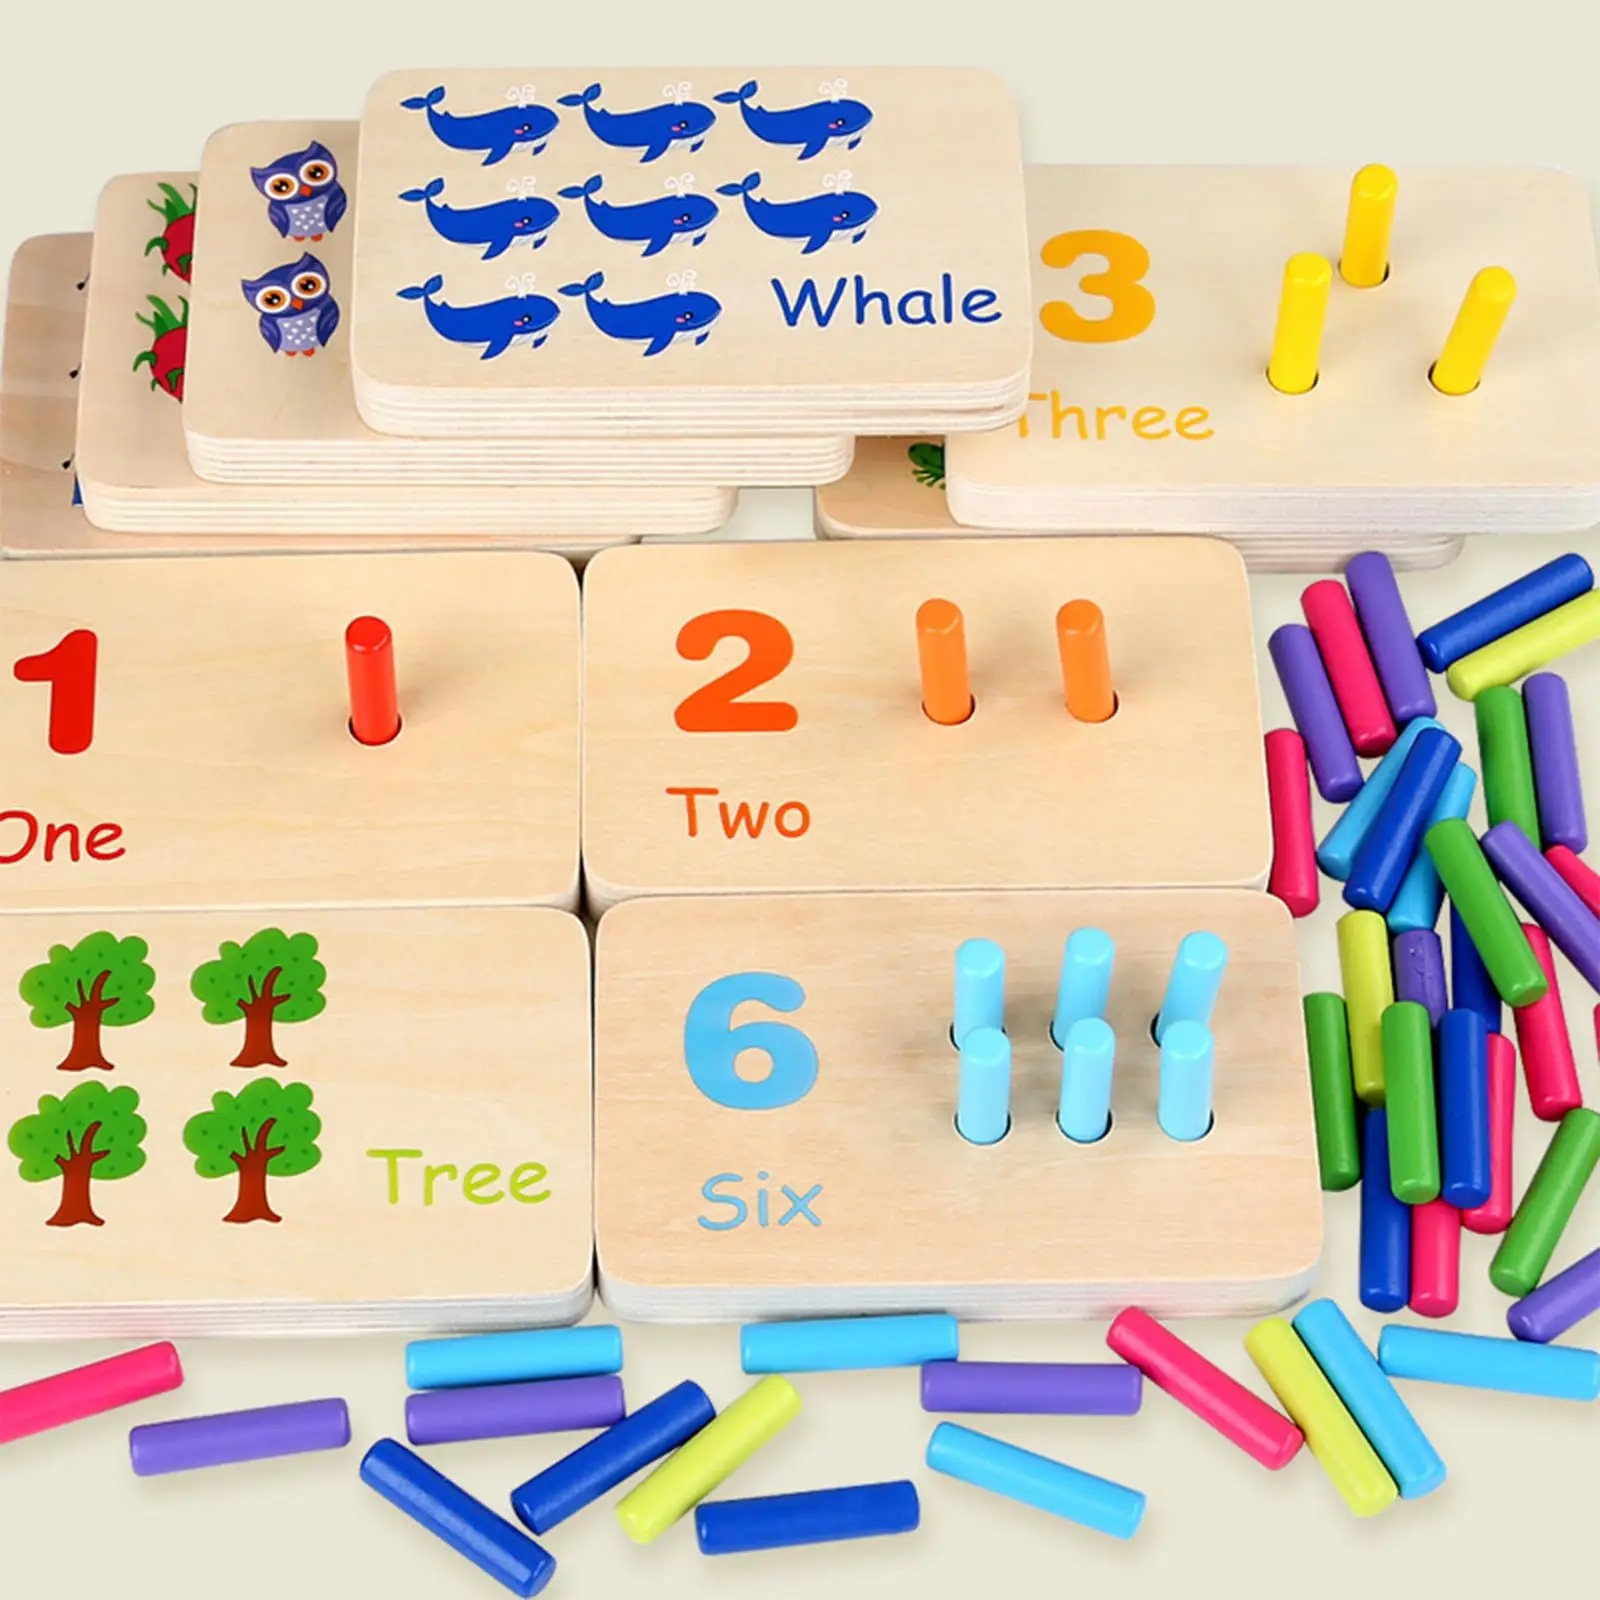 Wooden Math Toys Learning Puzzle Party Favors Science Cognition Numbers Matching Counting Game for Kindergarten Boys Girls Kids